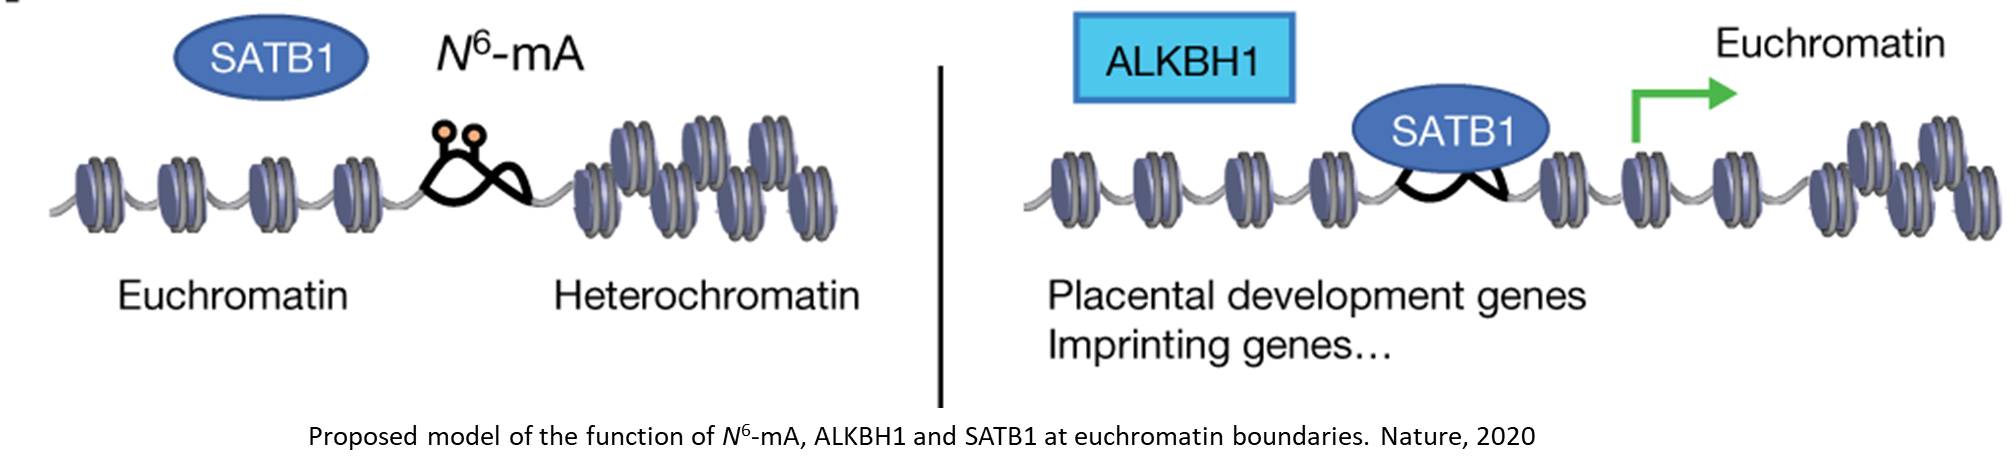 DNA modification determines fate of placenta